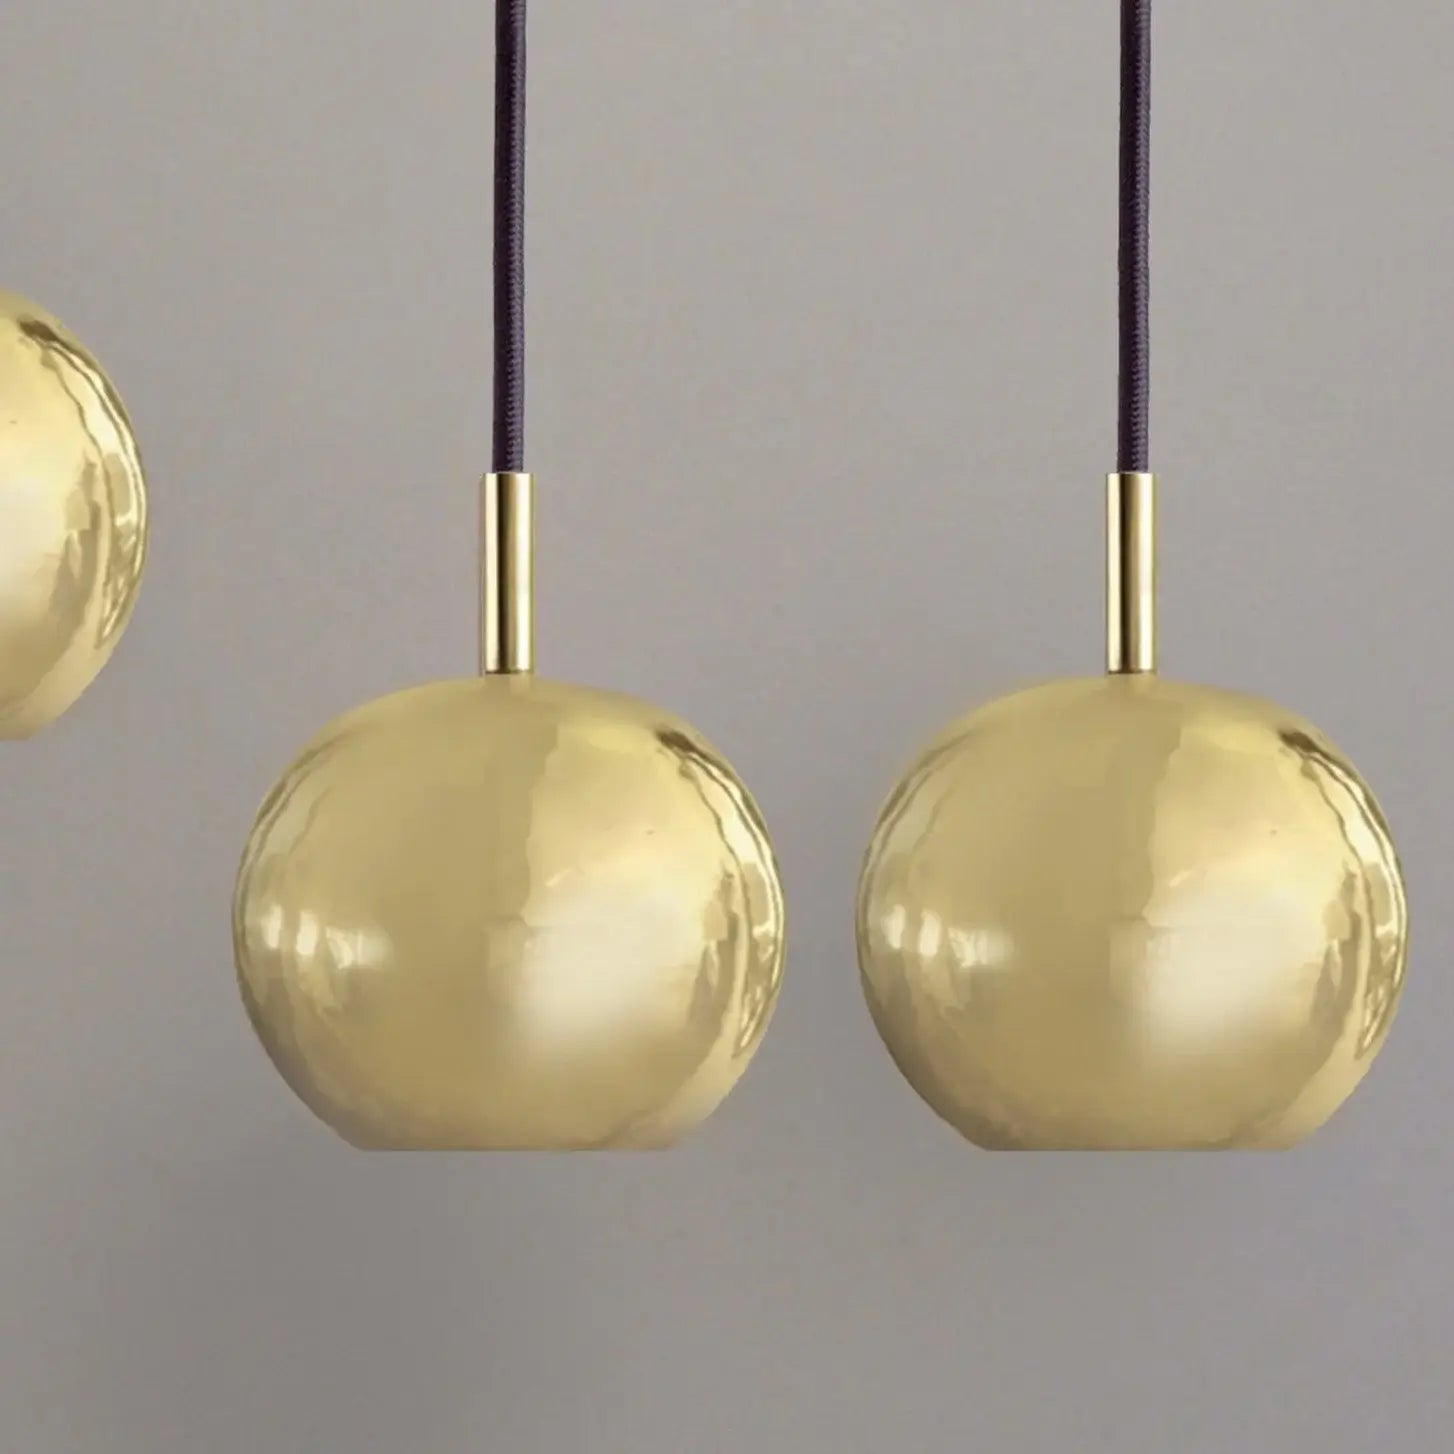 Dounia home Pendant light in Polished brass   made of Metal, Model: Mishal